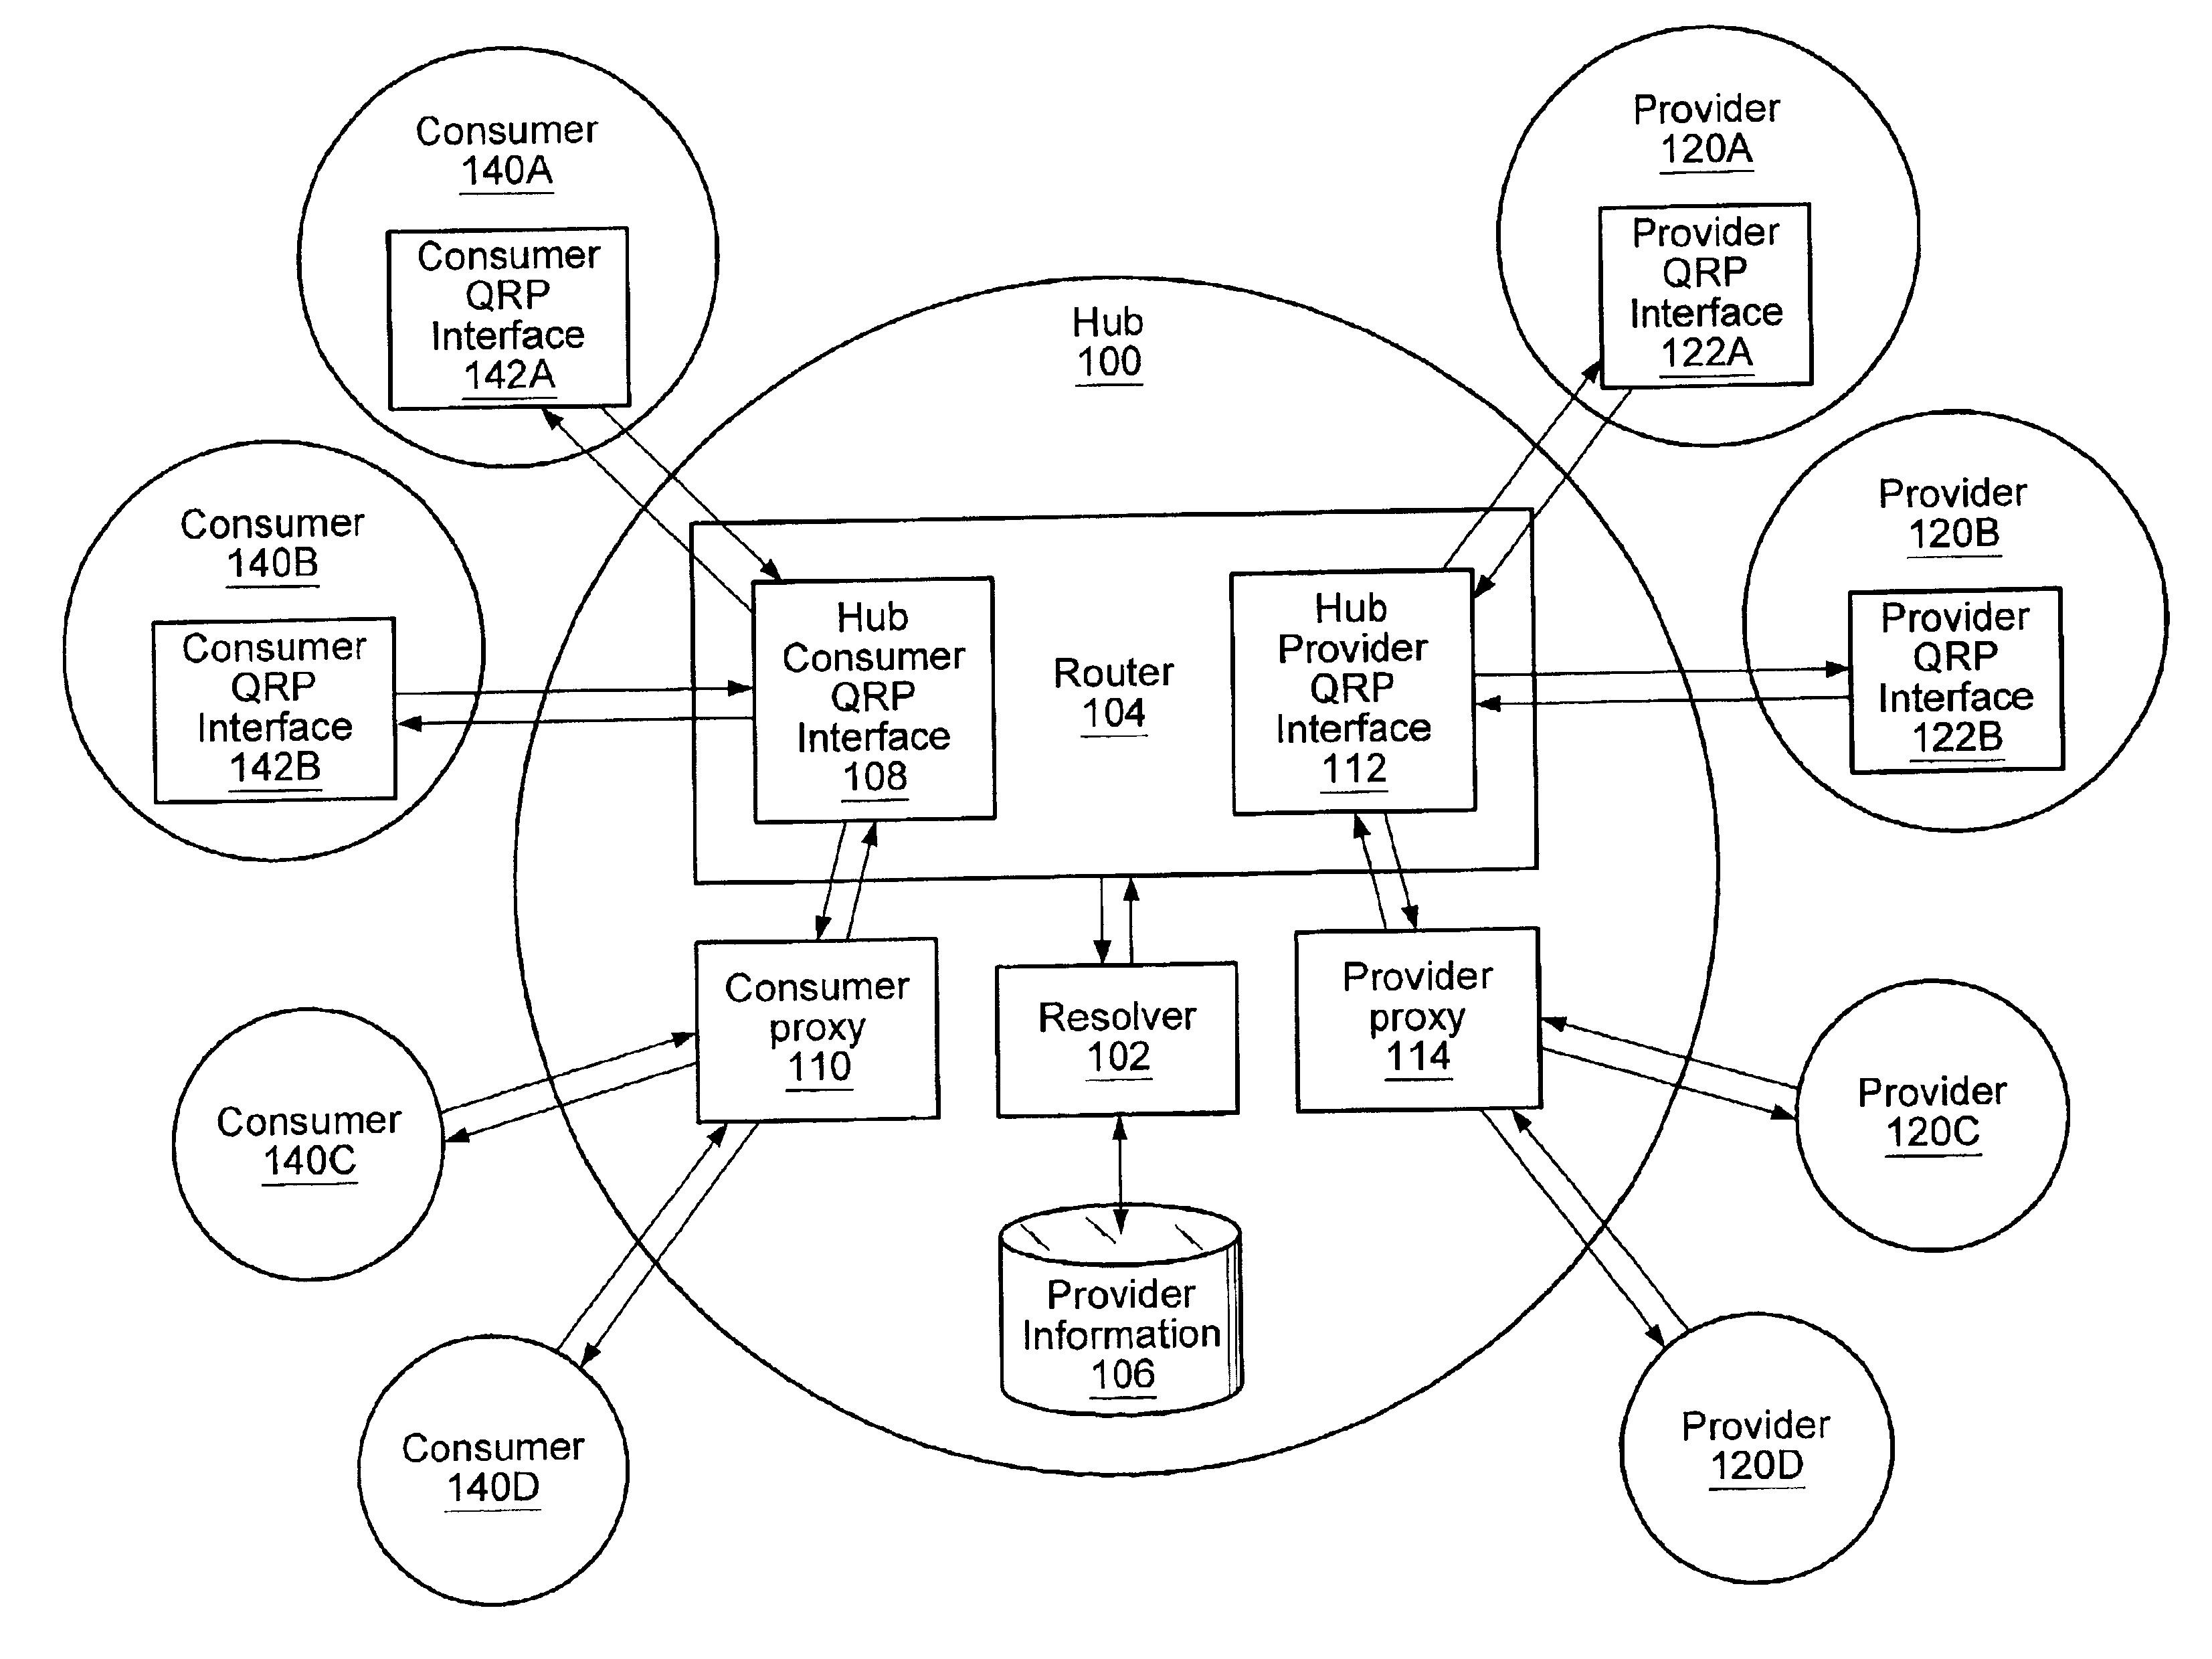 System and method for resolving distributed network search queries to information providers